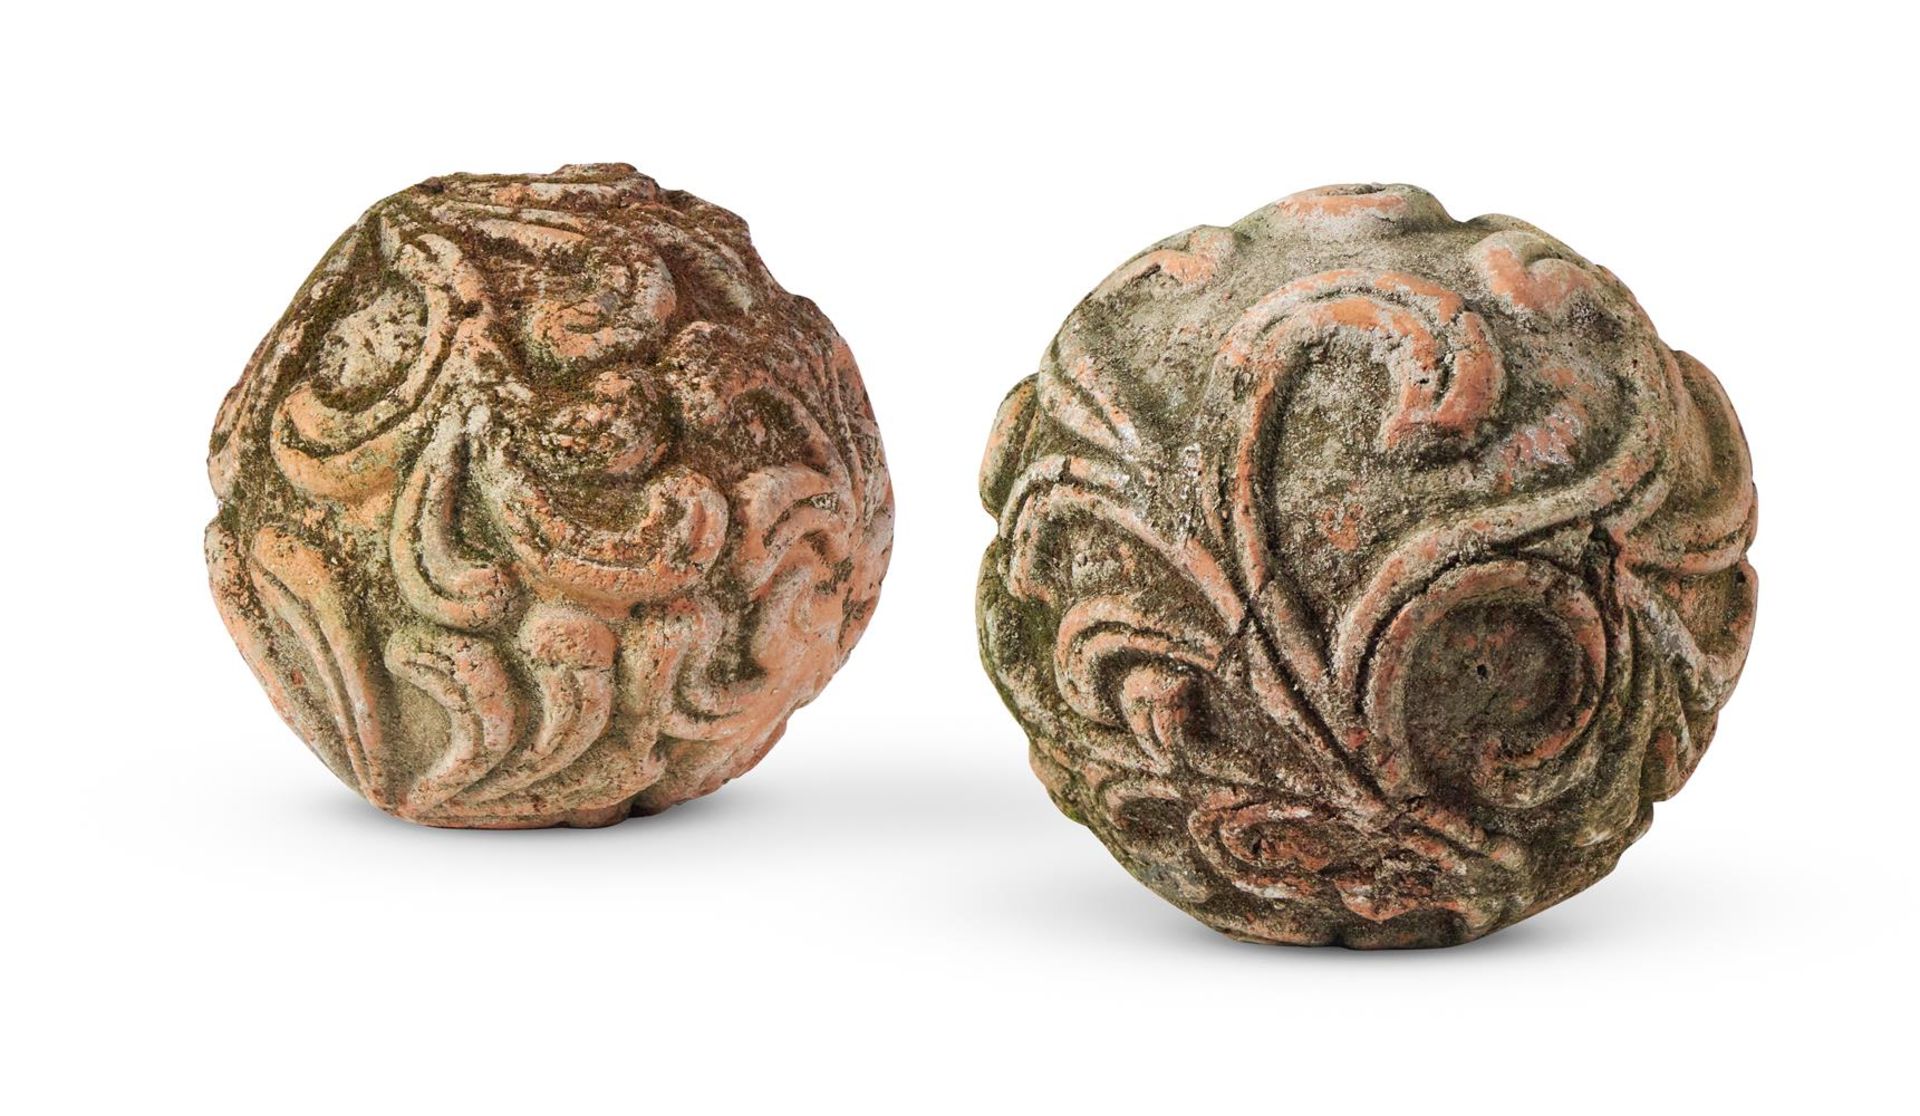 A PAIR OF TERRACOTTA BALL FINIALS, ITALIAN OR FRENCH, PROBABLY 19TH CENTURY